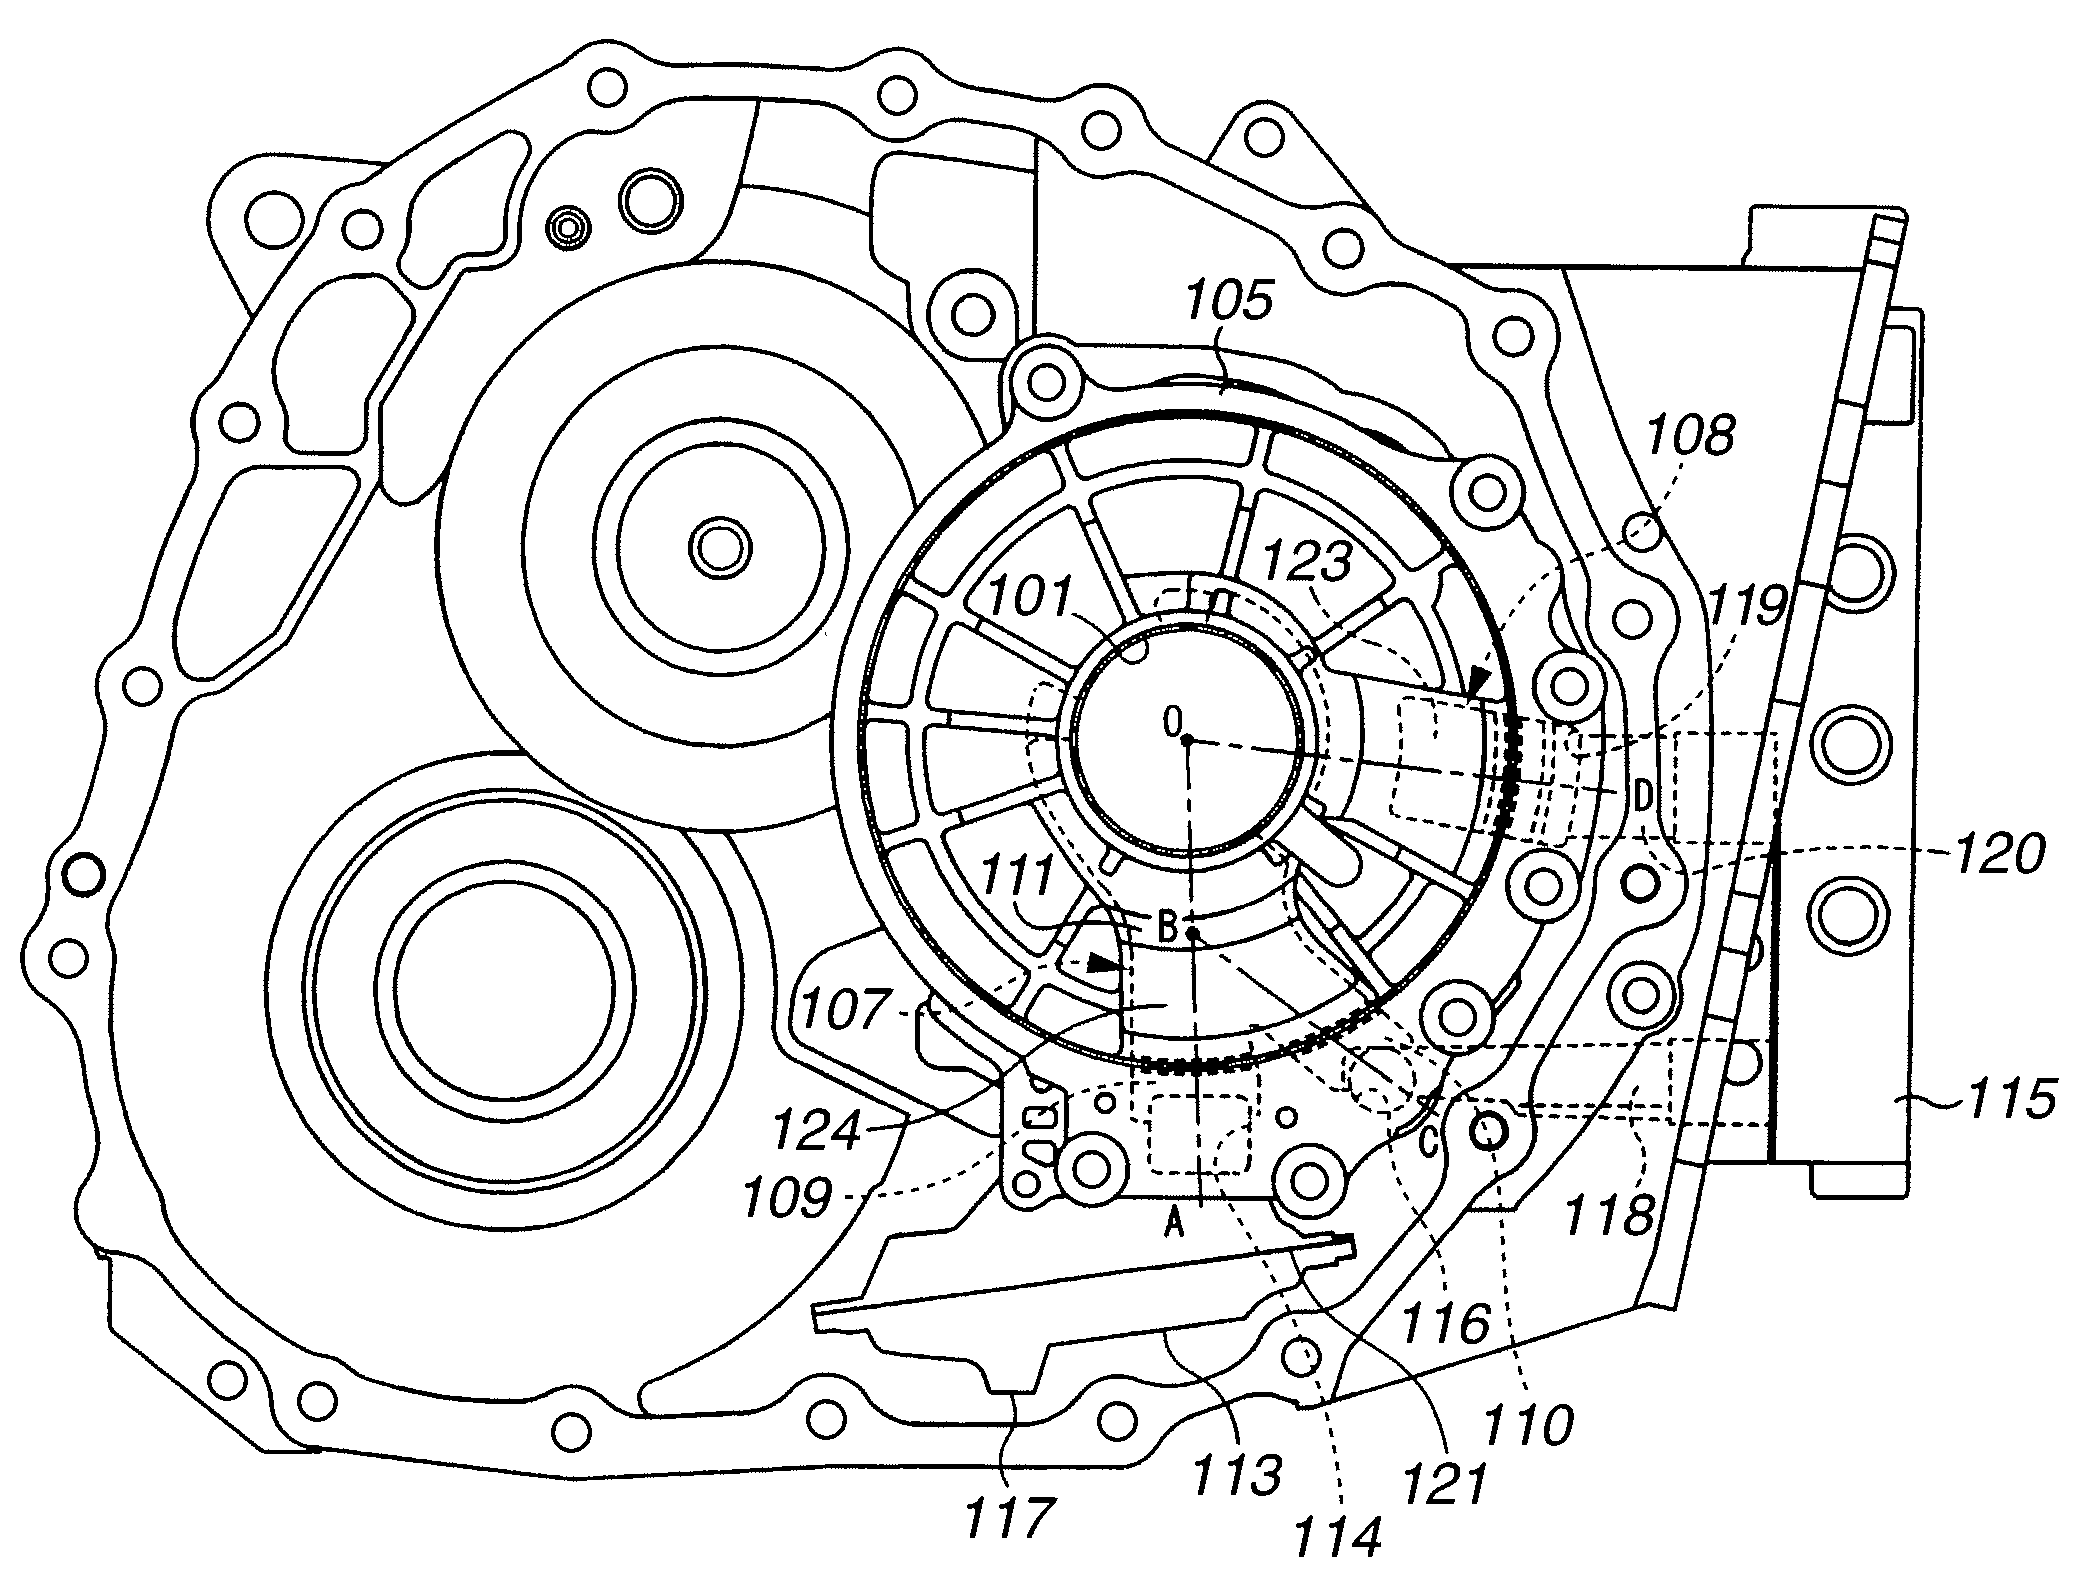 Oil pump structure of transmission